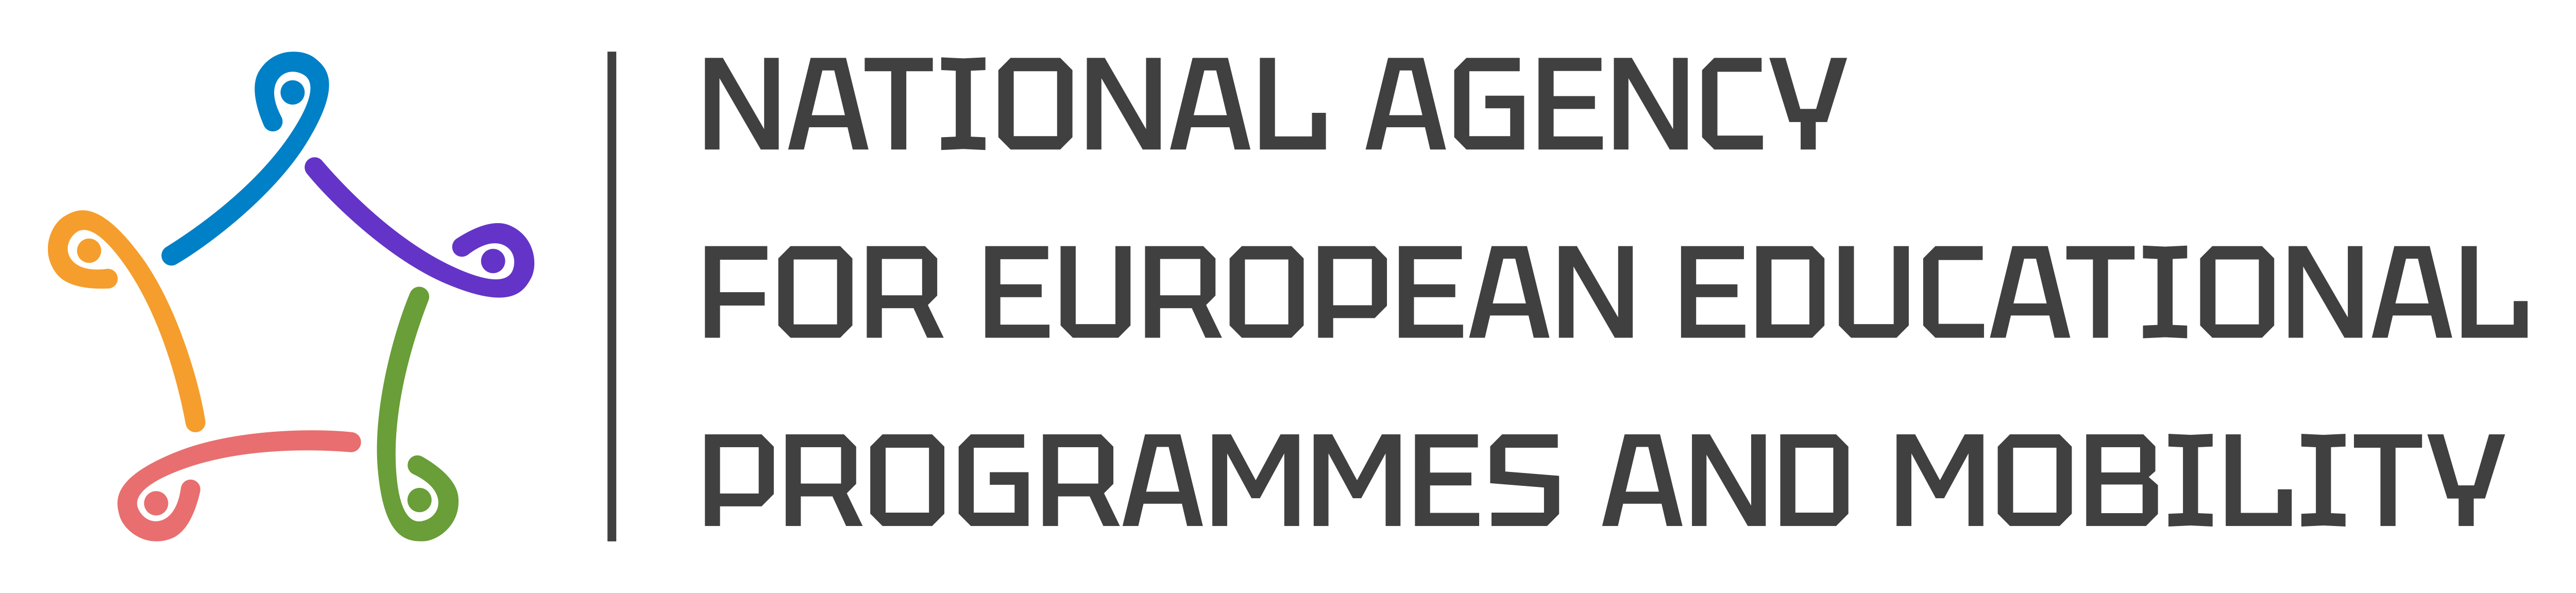 Logo National Agency for European Educational Programmes and Mobility 